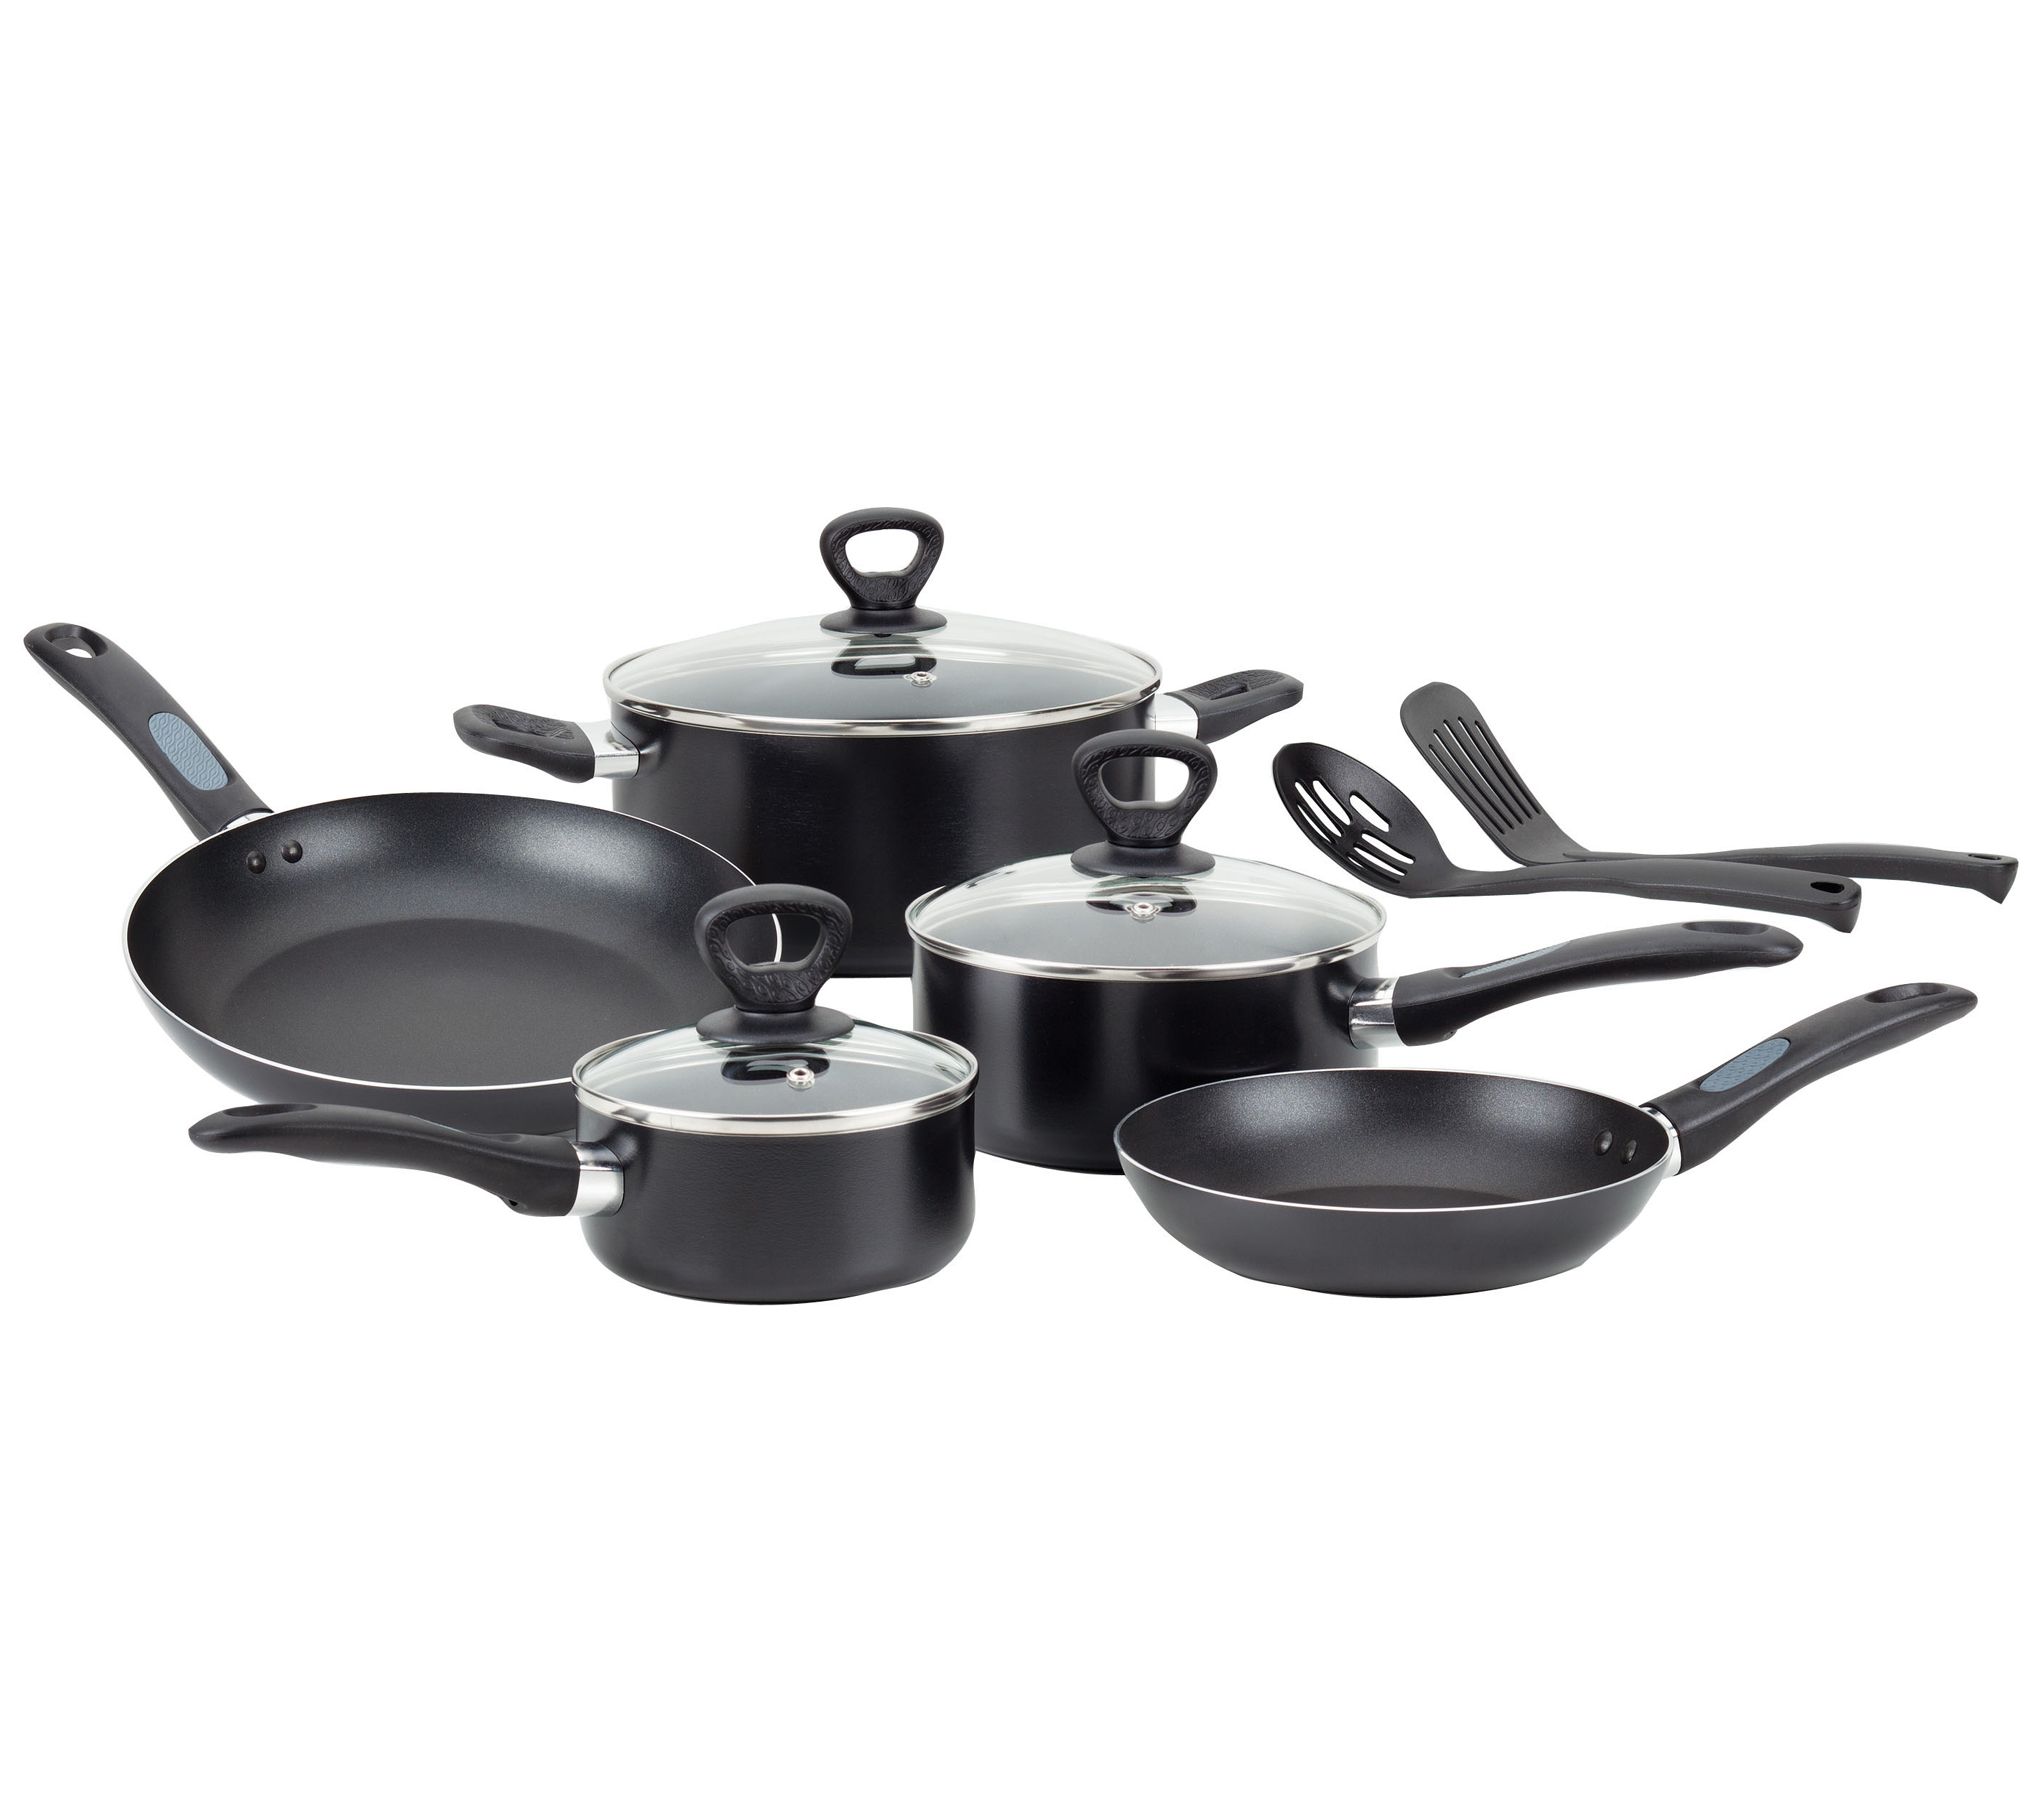 Tefal Cookware Set, First impression, Honest Review